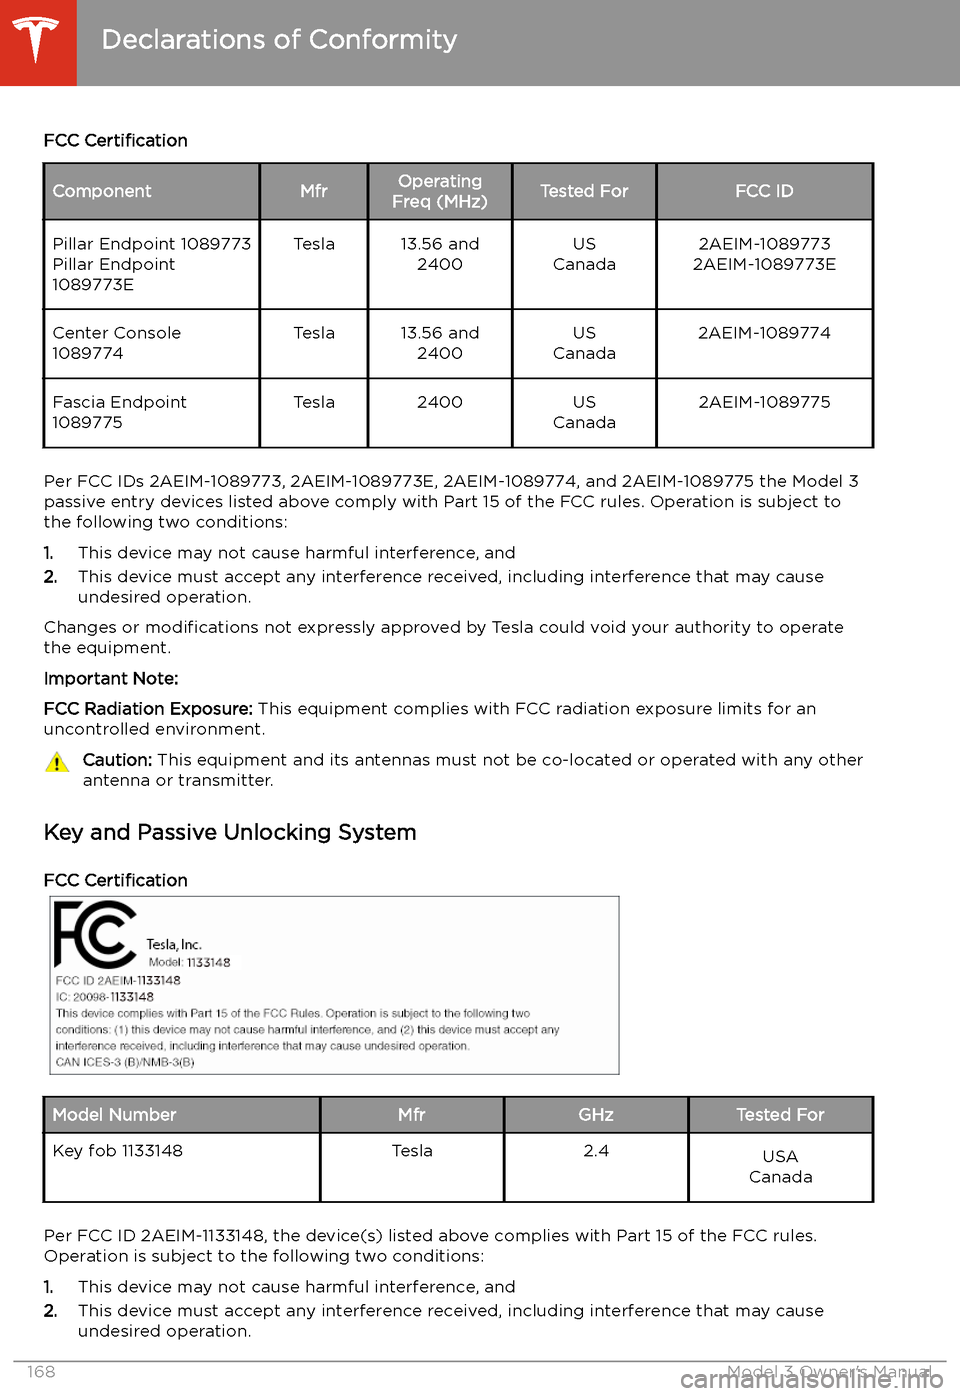 TESLA MODEL 3 2019  Owners Manual (Europe) FCC CertificationComponentMfrOperating
Freq (MHz)Tested ForFCC IDPillar Endpoint 1089773
Pillar Endpoint
1089773ETesla13.56 and 2400US
Canada2AEIM-1089773
2AEIM-1089773ECenter Console
1089774Tesla13.5